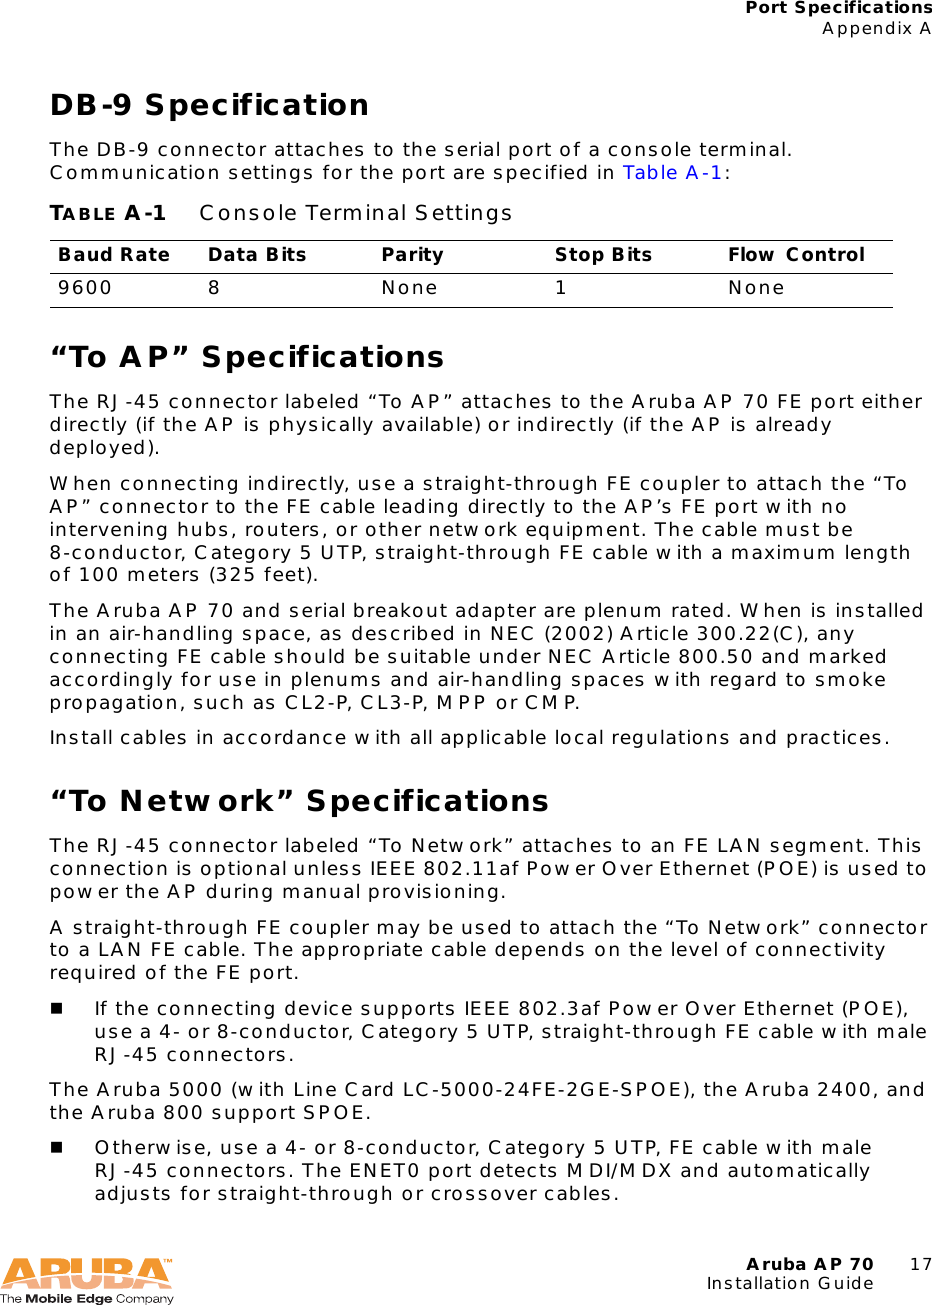 Aruba AP 70 17Installation GuidePort SpecificationsAppendix ADB-9 SpecificationThe DB-9 connector attaches to the serial port of a console terminal. Communication settings for the port are specified in Table A-1:“To AP” SpecificationsThe RJ-45 connector labeled “To AP” attaches to the Aruba AP 70 FE port either directly (if the AP is physically available) or indirectly (if the AP is already deployed).When connecting indirectly, use a straight-through FE coupler to attach the “To AP” connector to the FE cable leading directly to the AP’s FE port with no intervening hubs, routers, or other network equipment. The cable must be 8-conductor, Category 5 UTP, straight-through FE cable with a maximum length of 100 meters (325 feet).The Aruba AP 70 and serial breakout adapter are plenum rated. When is installed in an air-handling space, as described in NEC (2002) Article 300.22(C), any connecting FE cable should be suitable under NEC Article 800.50 and marked accordingly for use in plenums and air-handling spaces with regard to smoke propagation, such as CL2-P, CL3-P, MPP or CMP.Install cables in accordance with all applicable local regulations and practices.“To Network” SpecificationsThe RJ-45 connector labeled “To Network” attaches to an FE LAN segment. This connection is optional unless IEEE 802.11af Power Over Ethernet (POE) is used to power the AP during manual provisioning.A straight-through FE coupler may be used to attach the “To Network” connector to a LAN FE cable. The appropriate cable depends on the level of connectivity required of the FE port.If the connecting device supports IEEE 802.3af Power Over Ethernet (POE), use a 4- or 8-conductor, Category 5 UTP, straight-through FE cable with male RJ-45 connectors.The Aruba 5000 (with Line Card LC-5000-24FE-2GE-SPOE), the Aruba 2400, and the Aruba 800 support SPOE.Otherwise, use a 4- or 8-conductor, Category 5 UTP, FE cable with male RJ-45 connectors. The ENET0 port detects MDI/MDX and automatically adjusts for straight-through or crossover cables.TABLE A-1 Console Terminal SettingsBaud Rate Data Bits Parity Stop Bits Flow Control9600 8 None 1 None